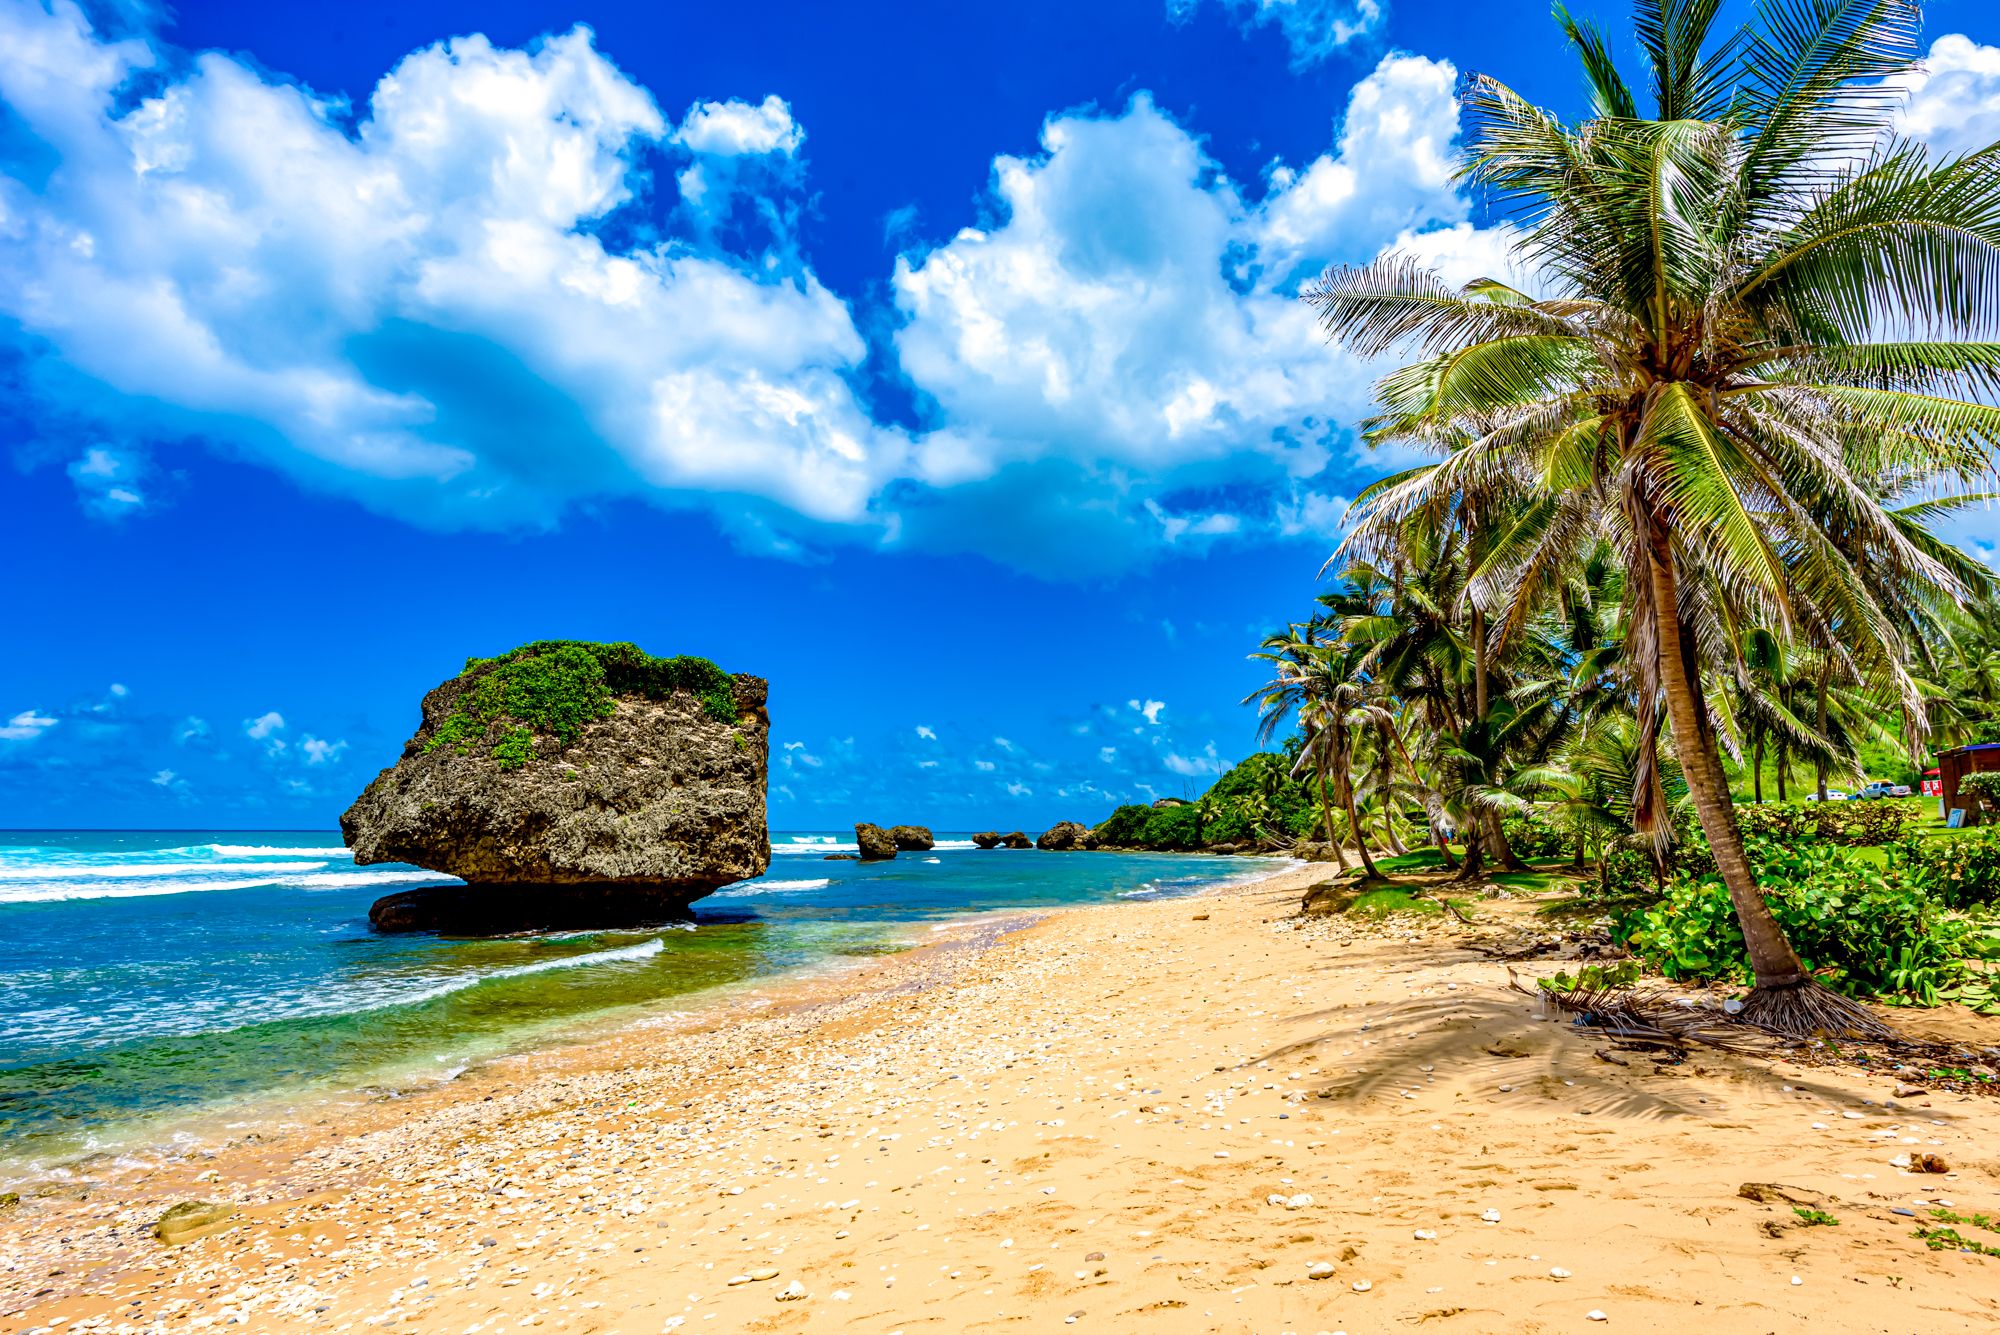 38 Pictures of Barbados You'll Fall in Love with SANDALS